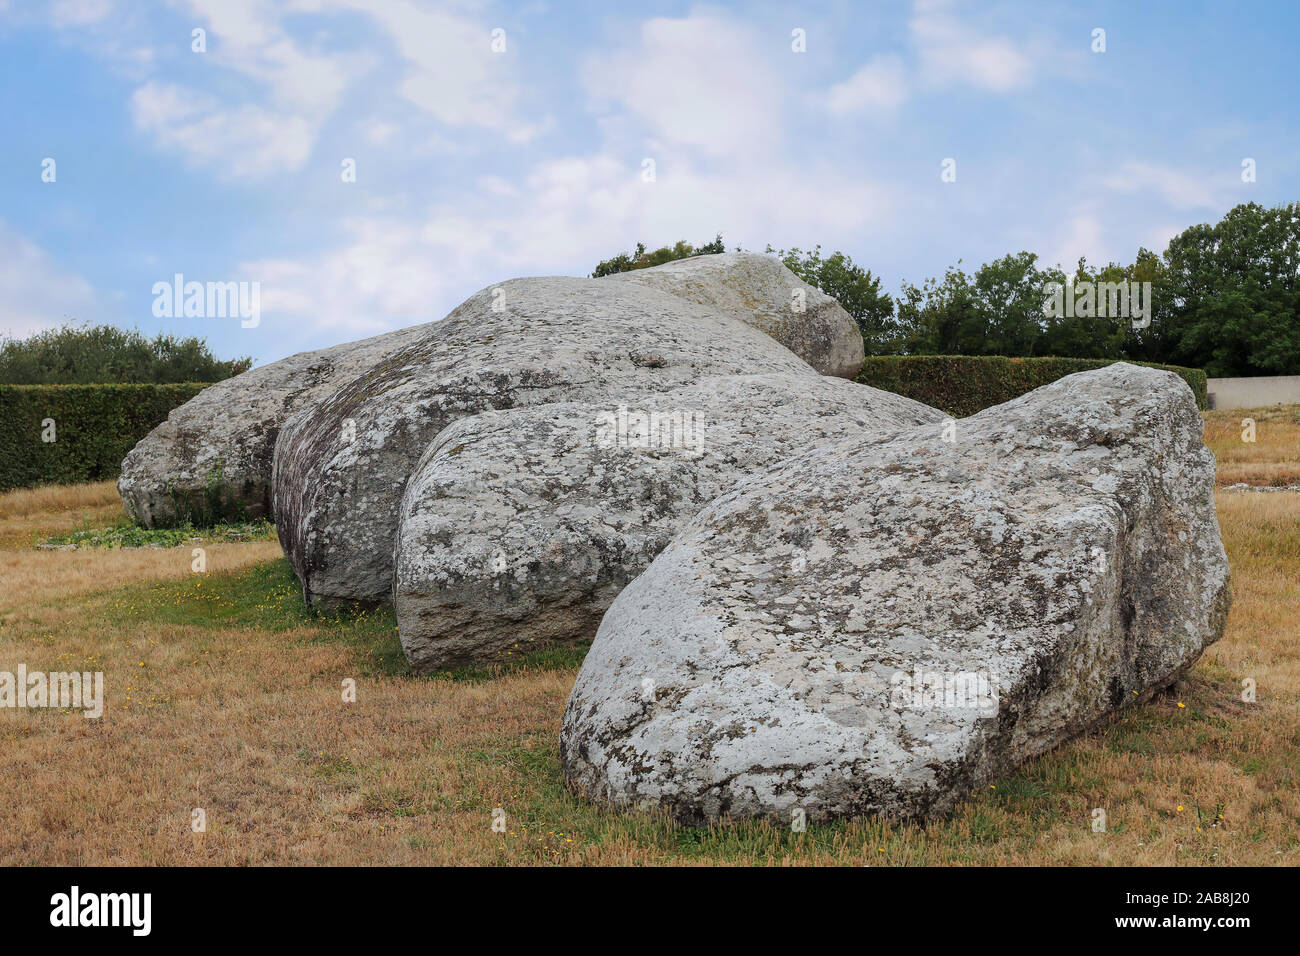 Broken Menhir of Er Grah - the largest menhir erected in the Neolithic era, Locmariaquer, Brittany, France Stock Photo